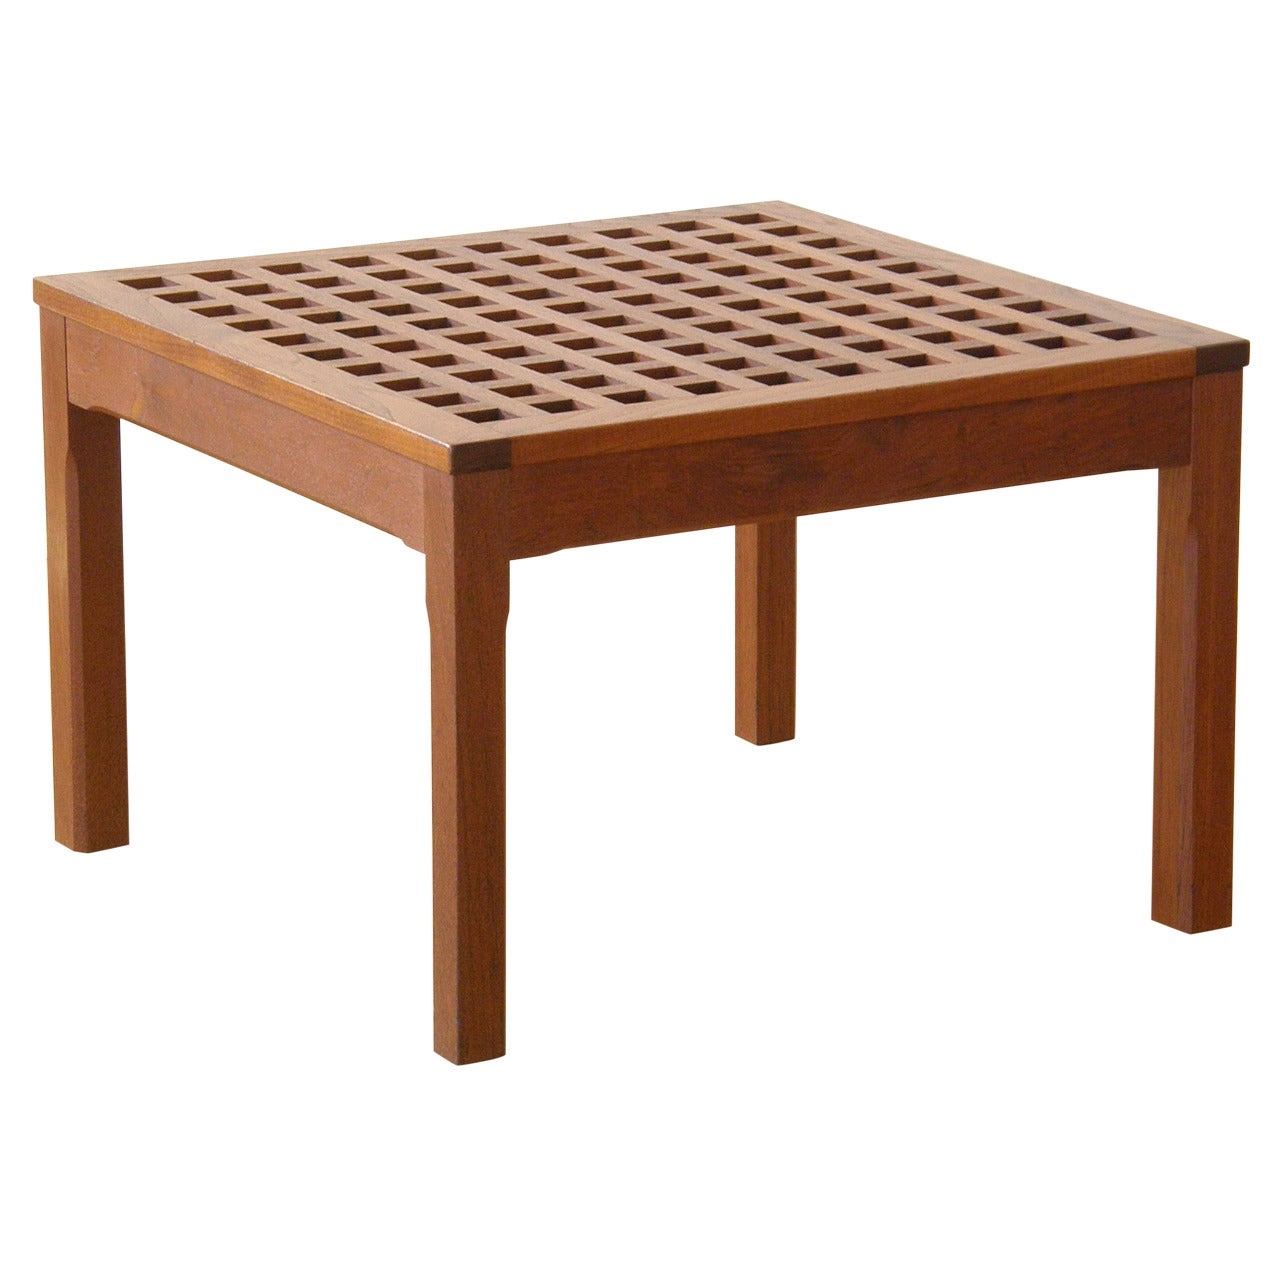 Square Teak Grid Top Coffee Table Corner Table or Side Table